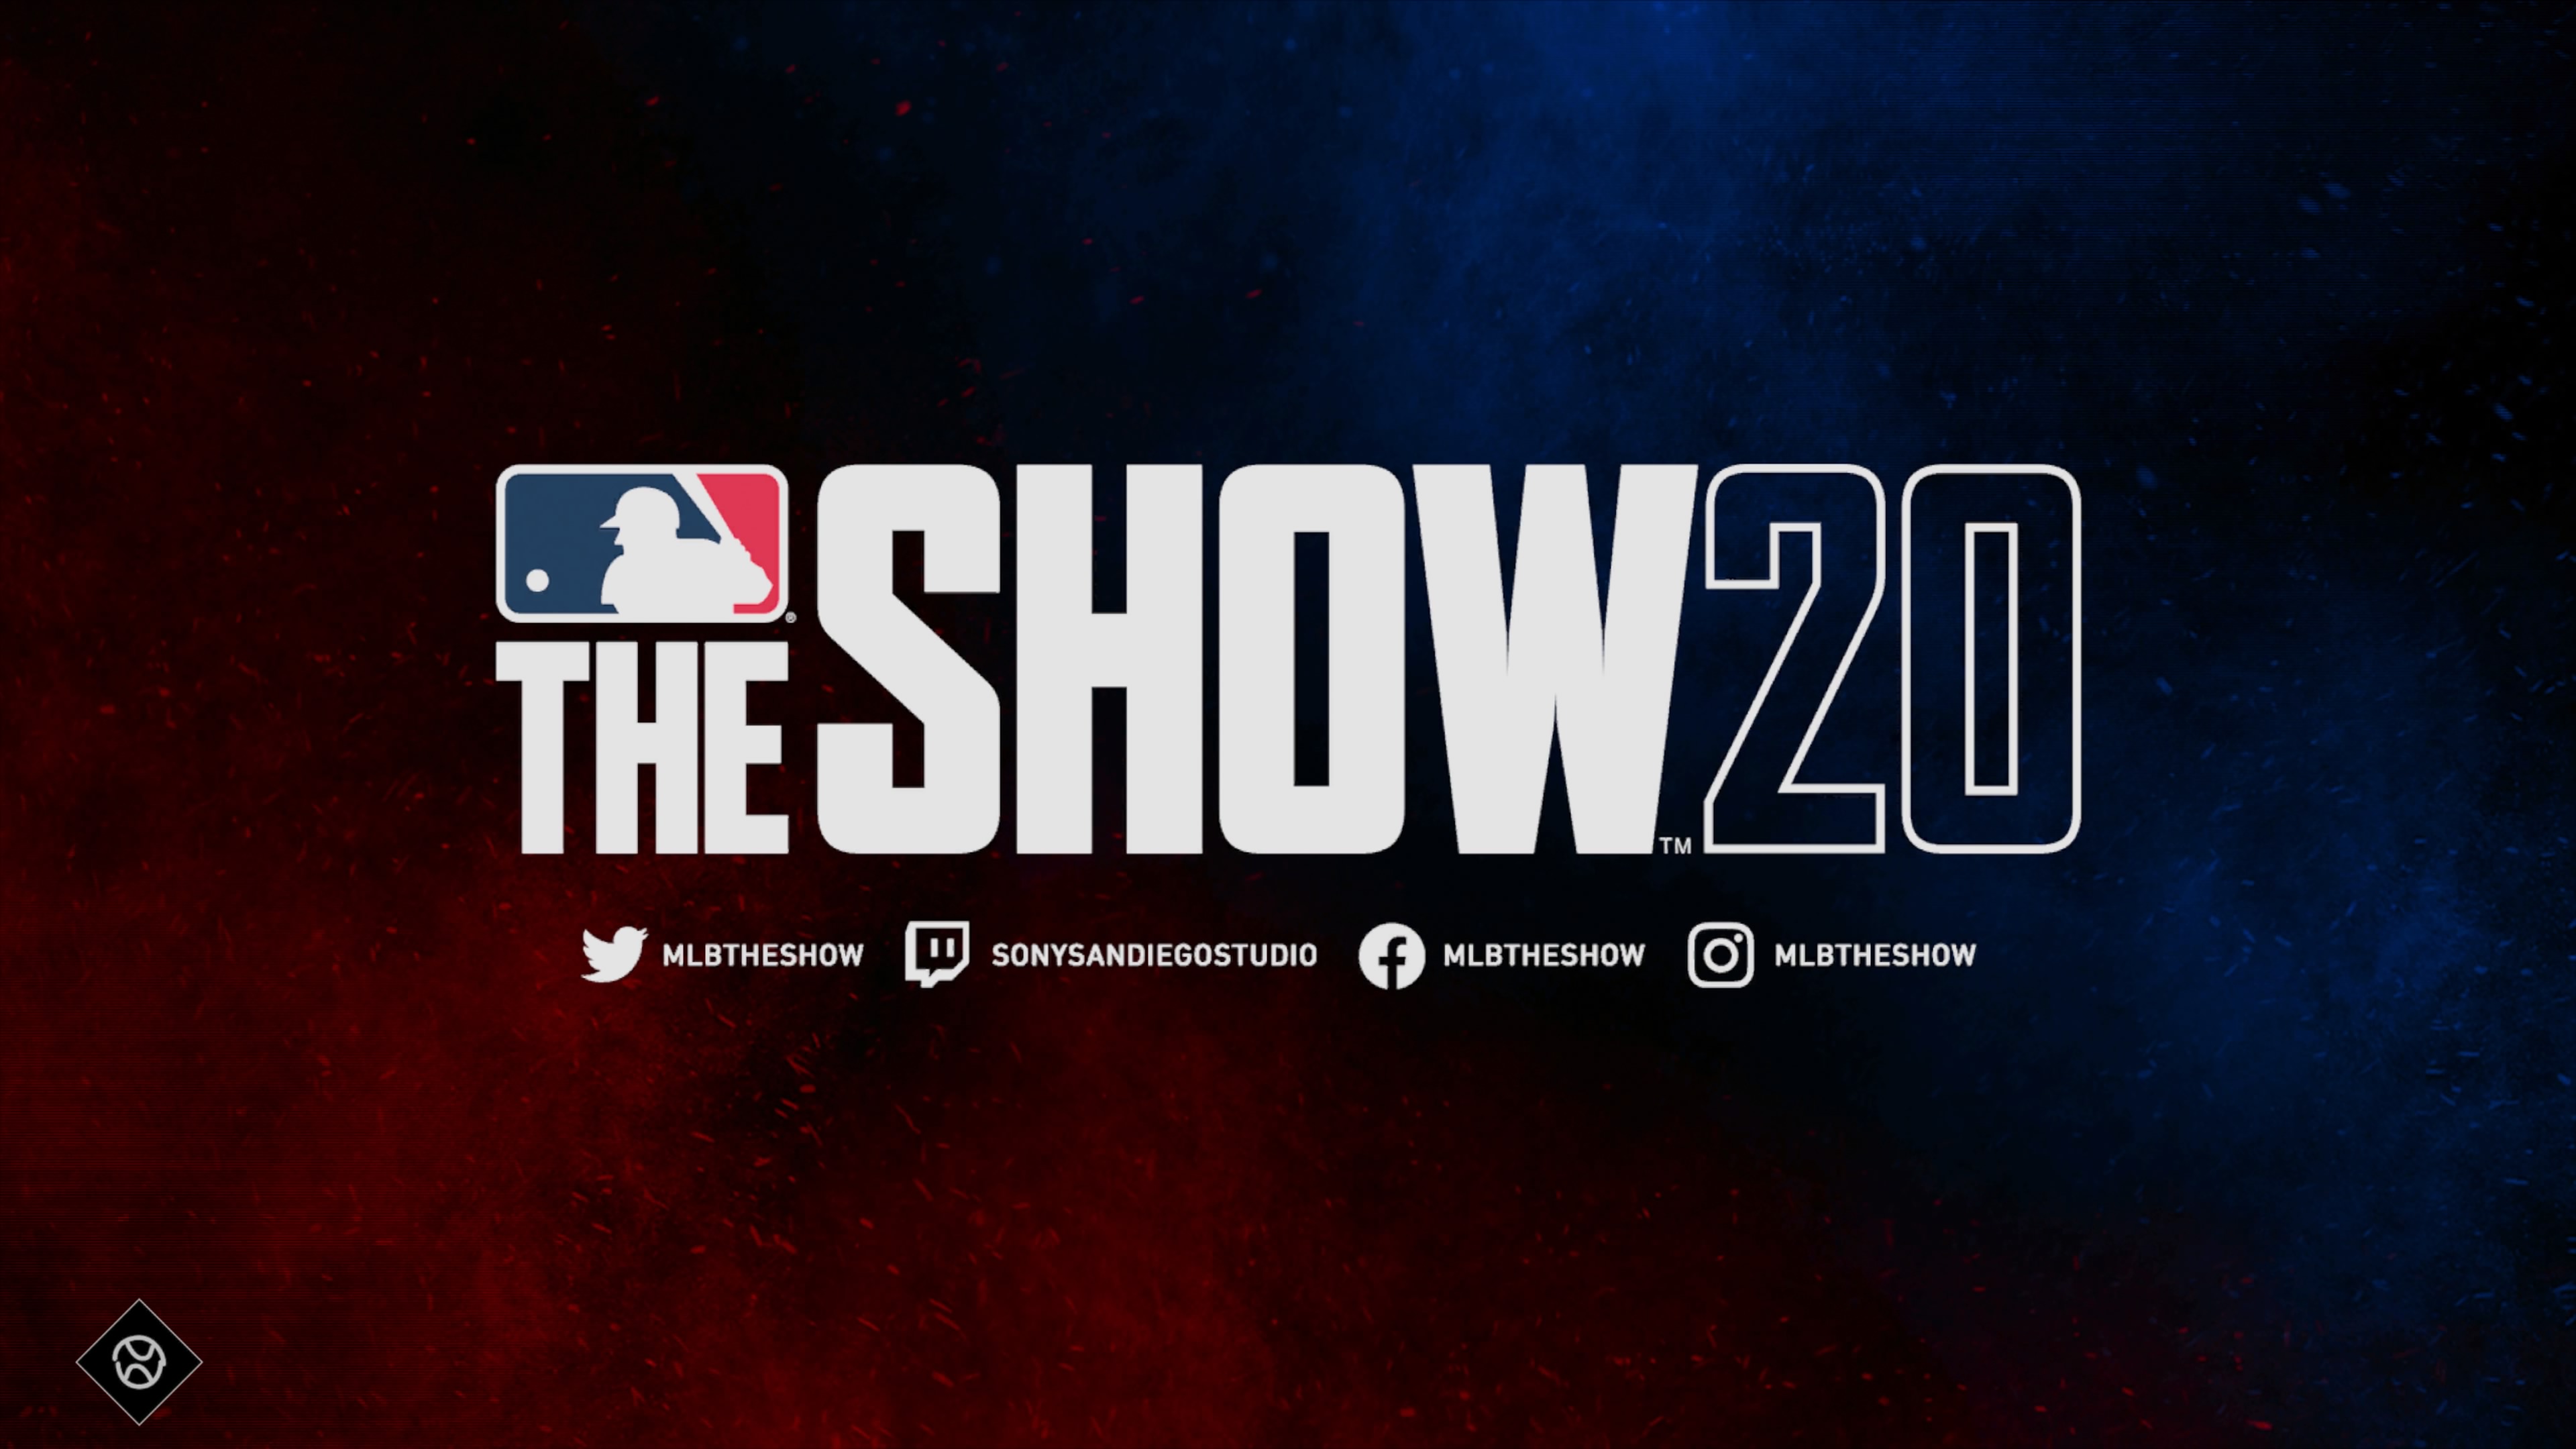 Game review: MLB The Show 20